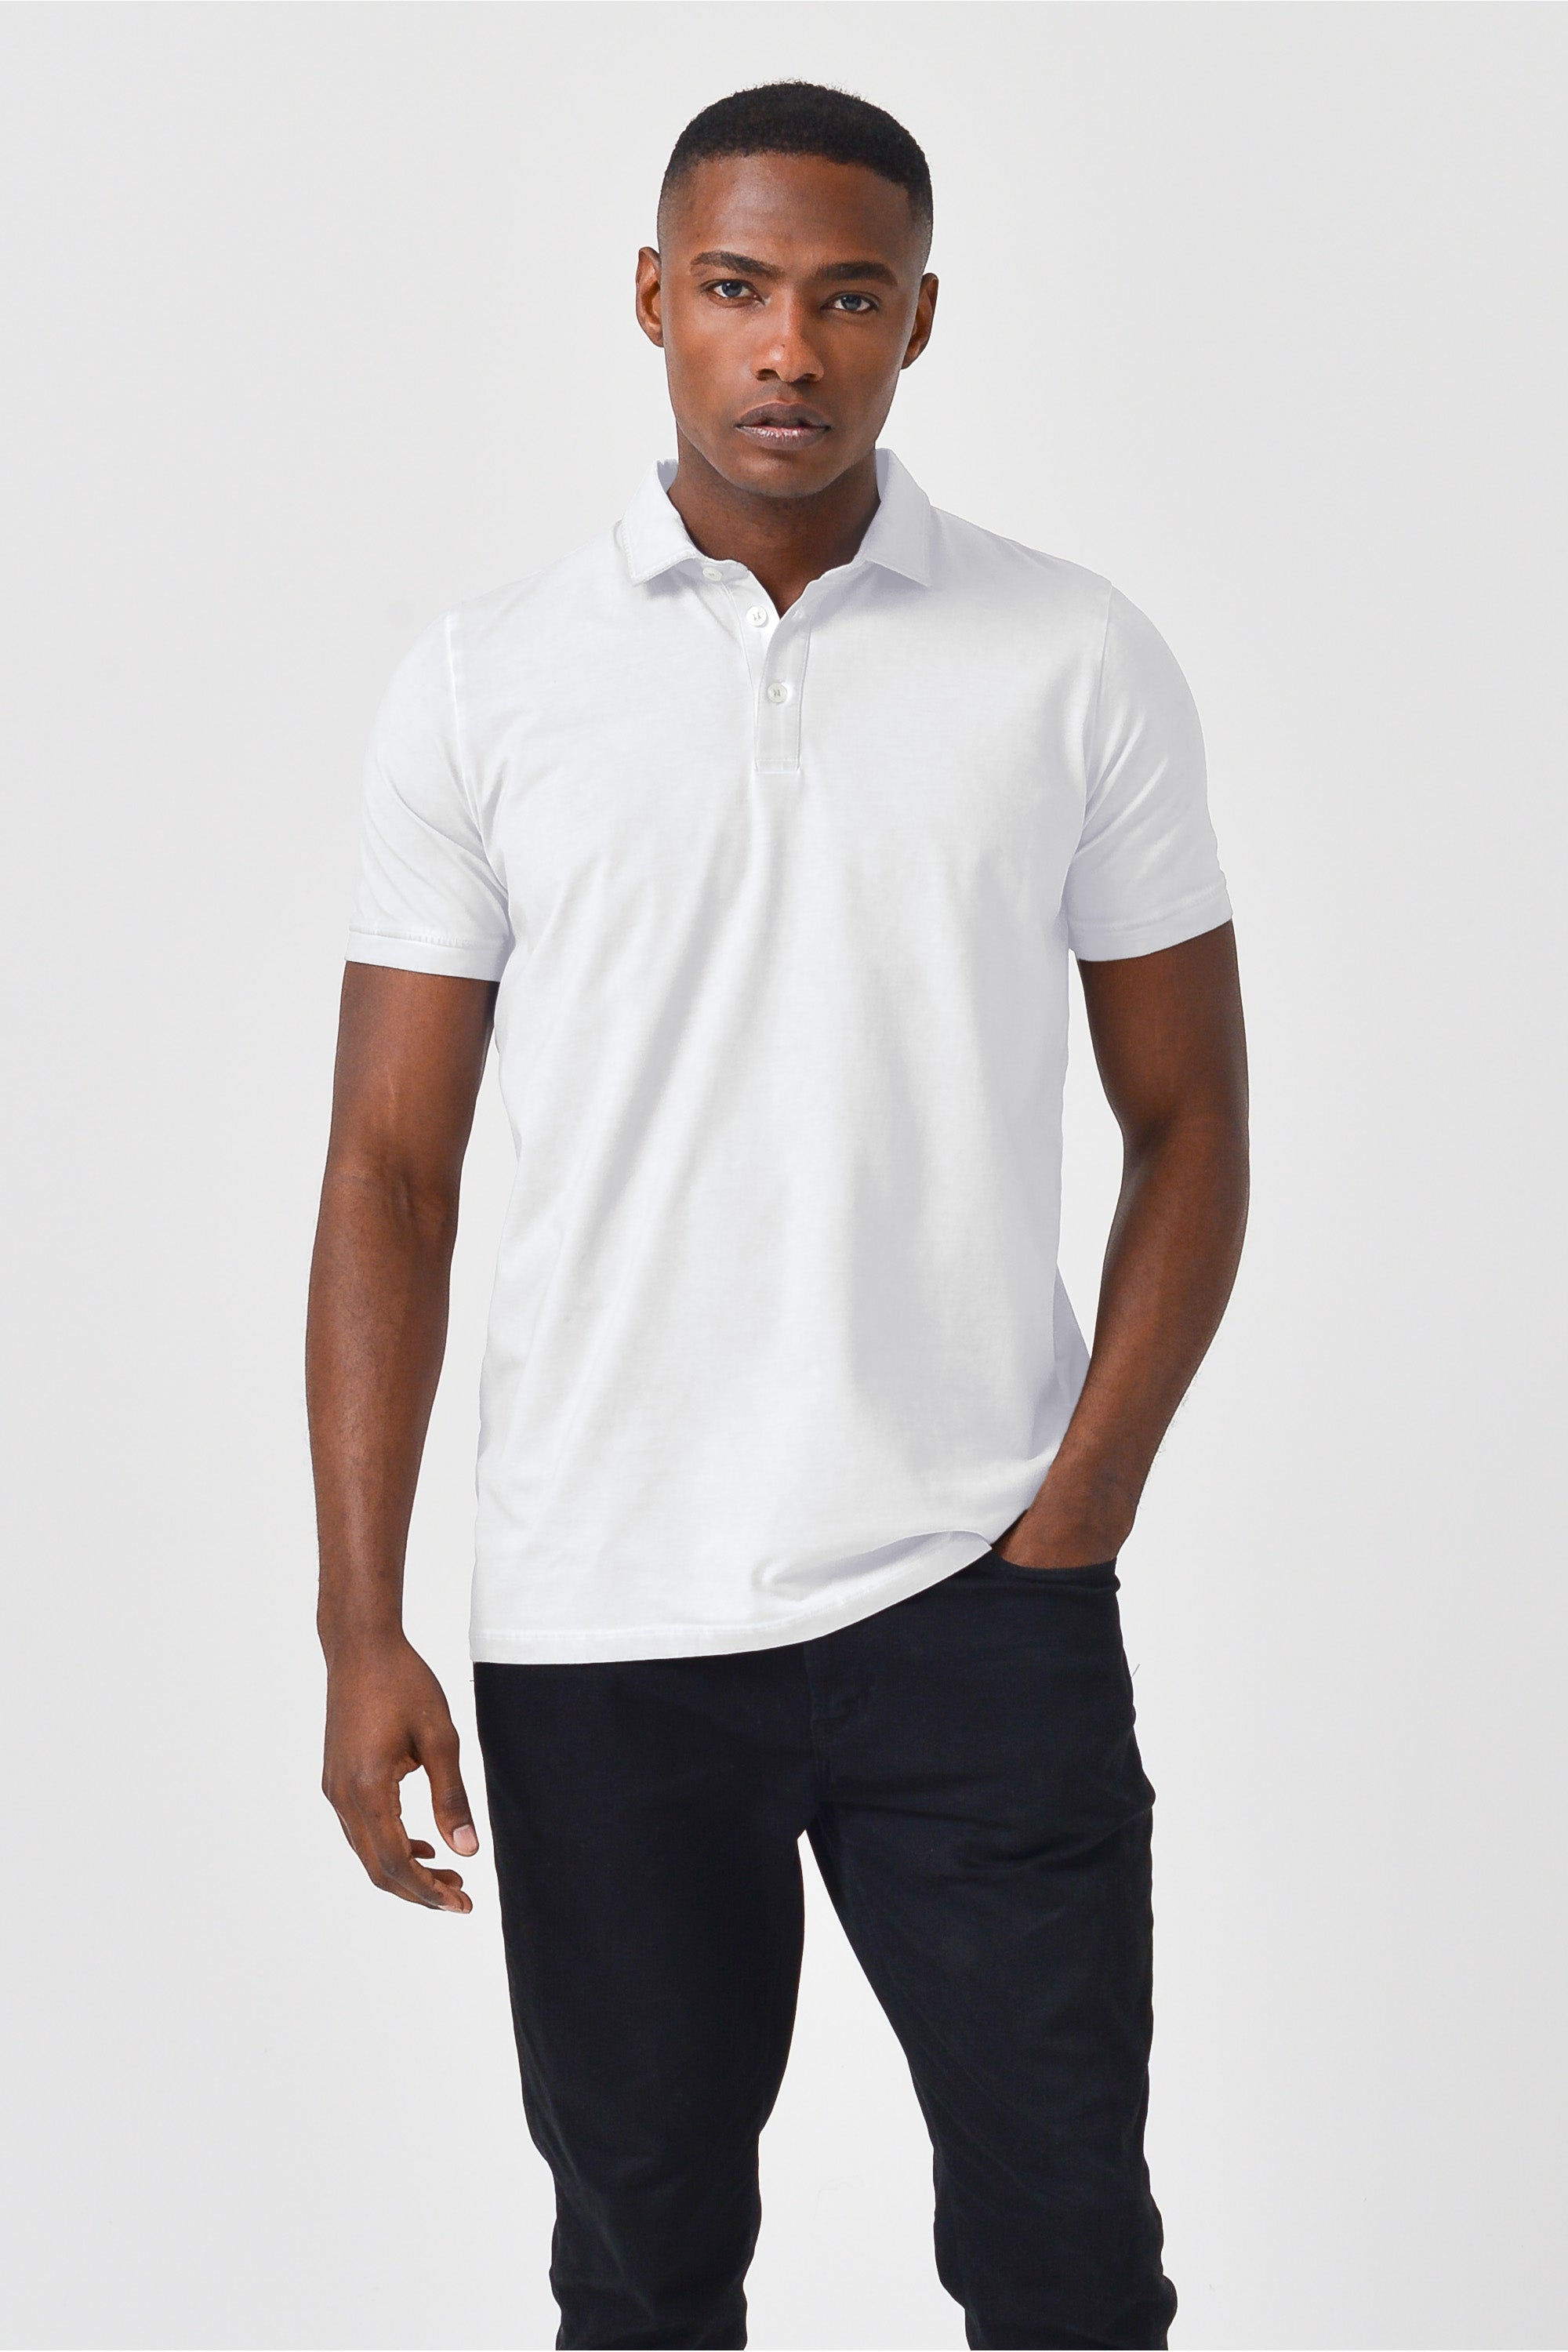 Performance Polo in White